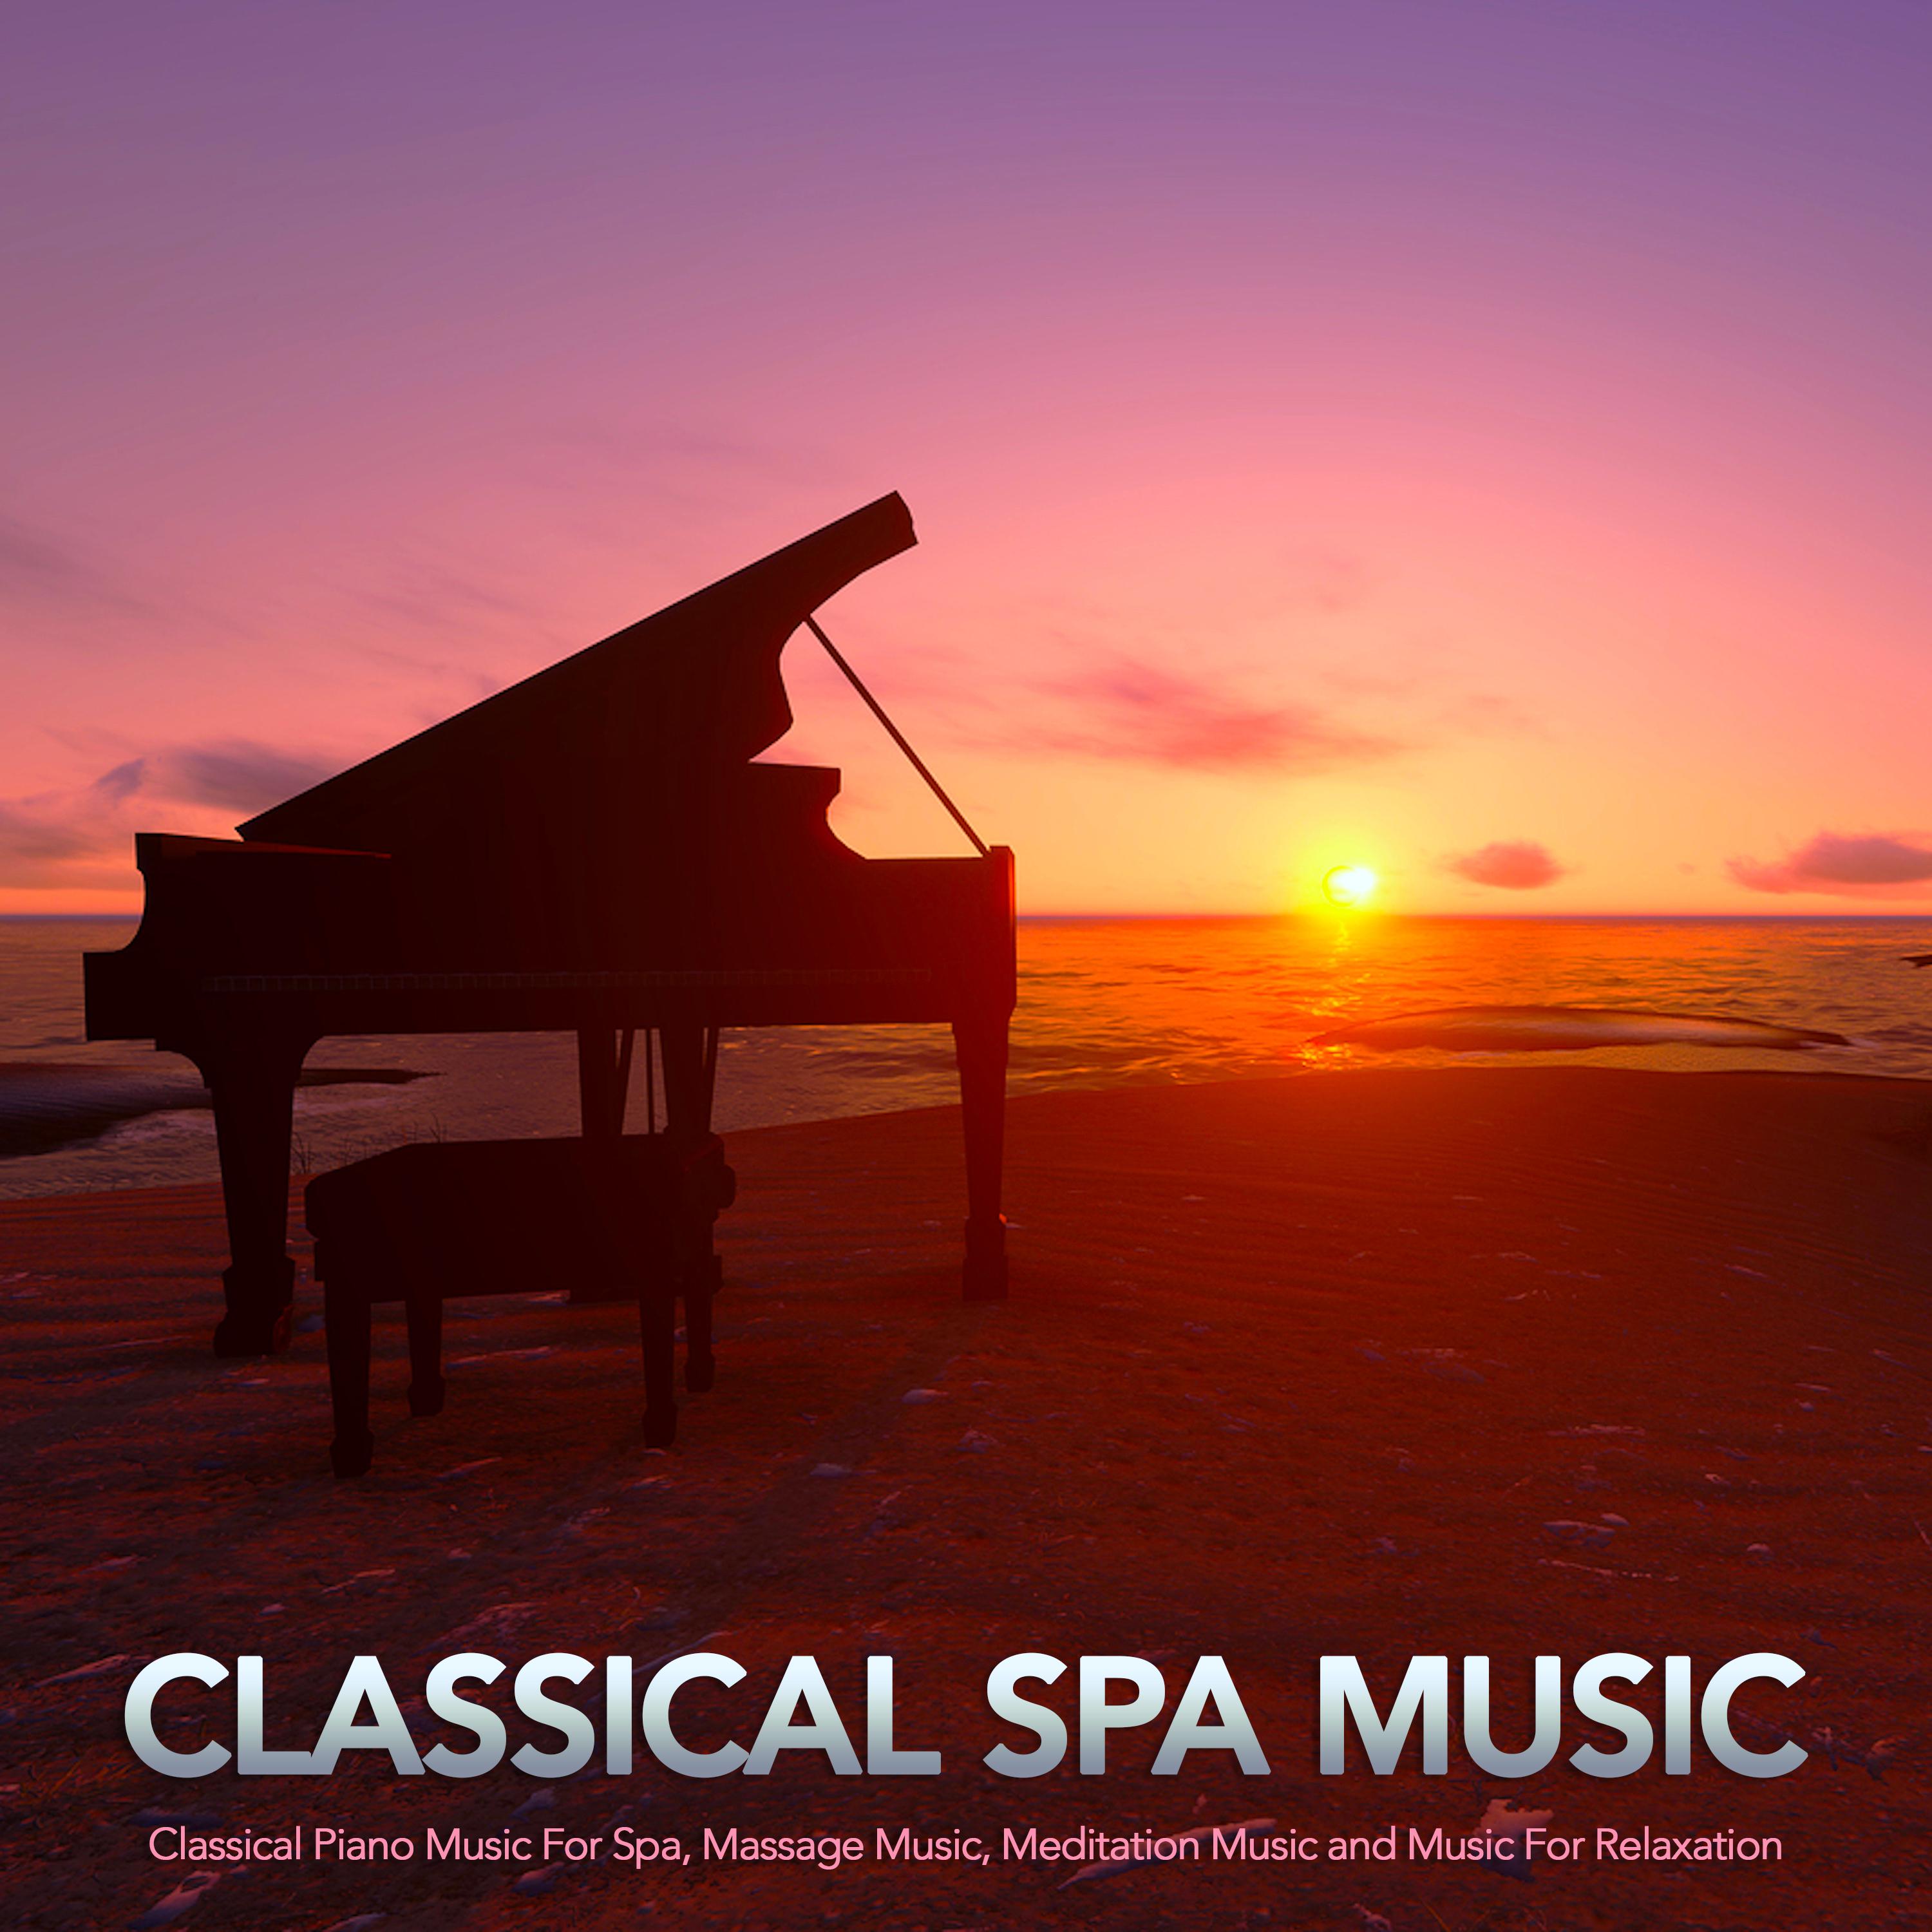 Reverie - Debussy - Classical Piano Music - Spa Music